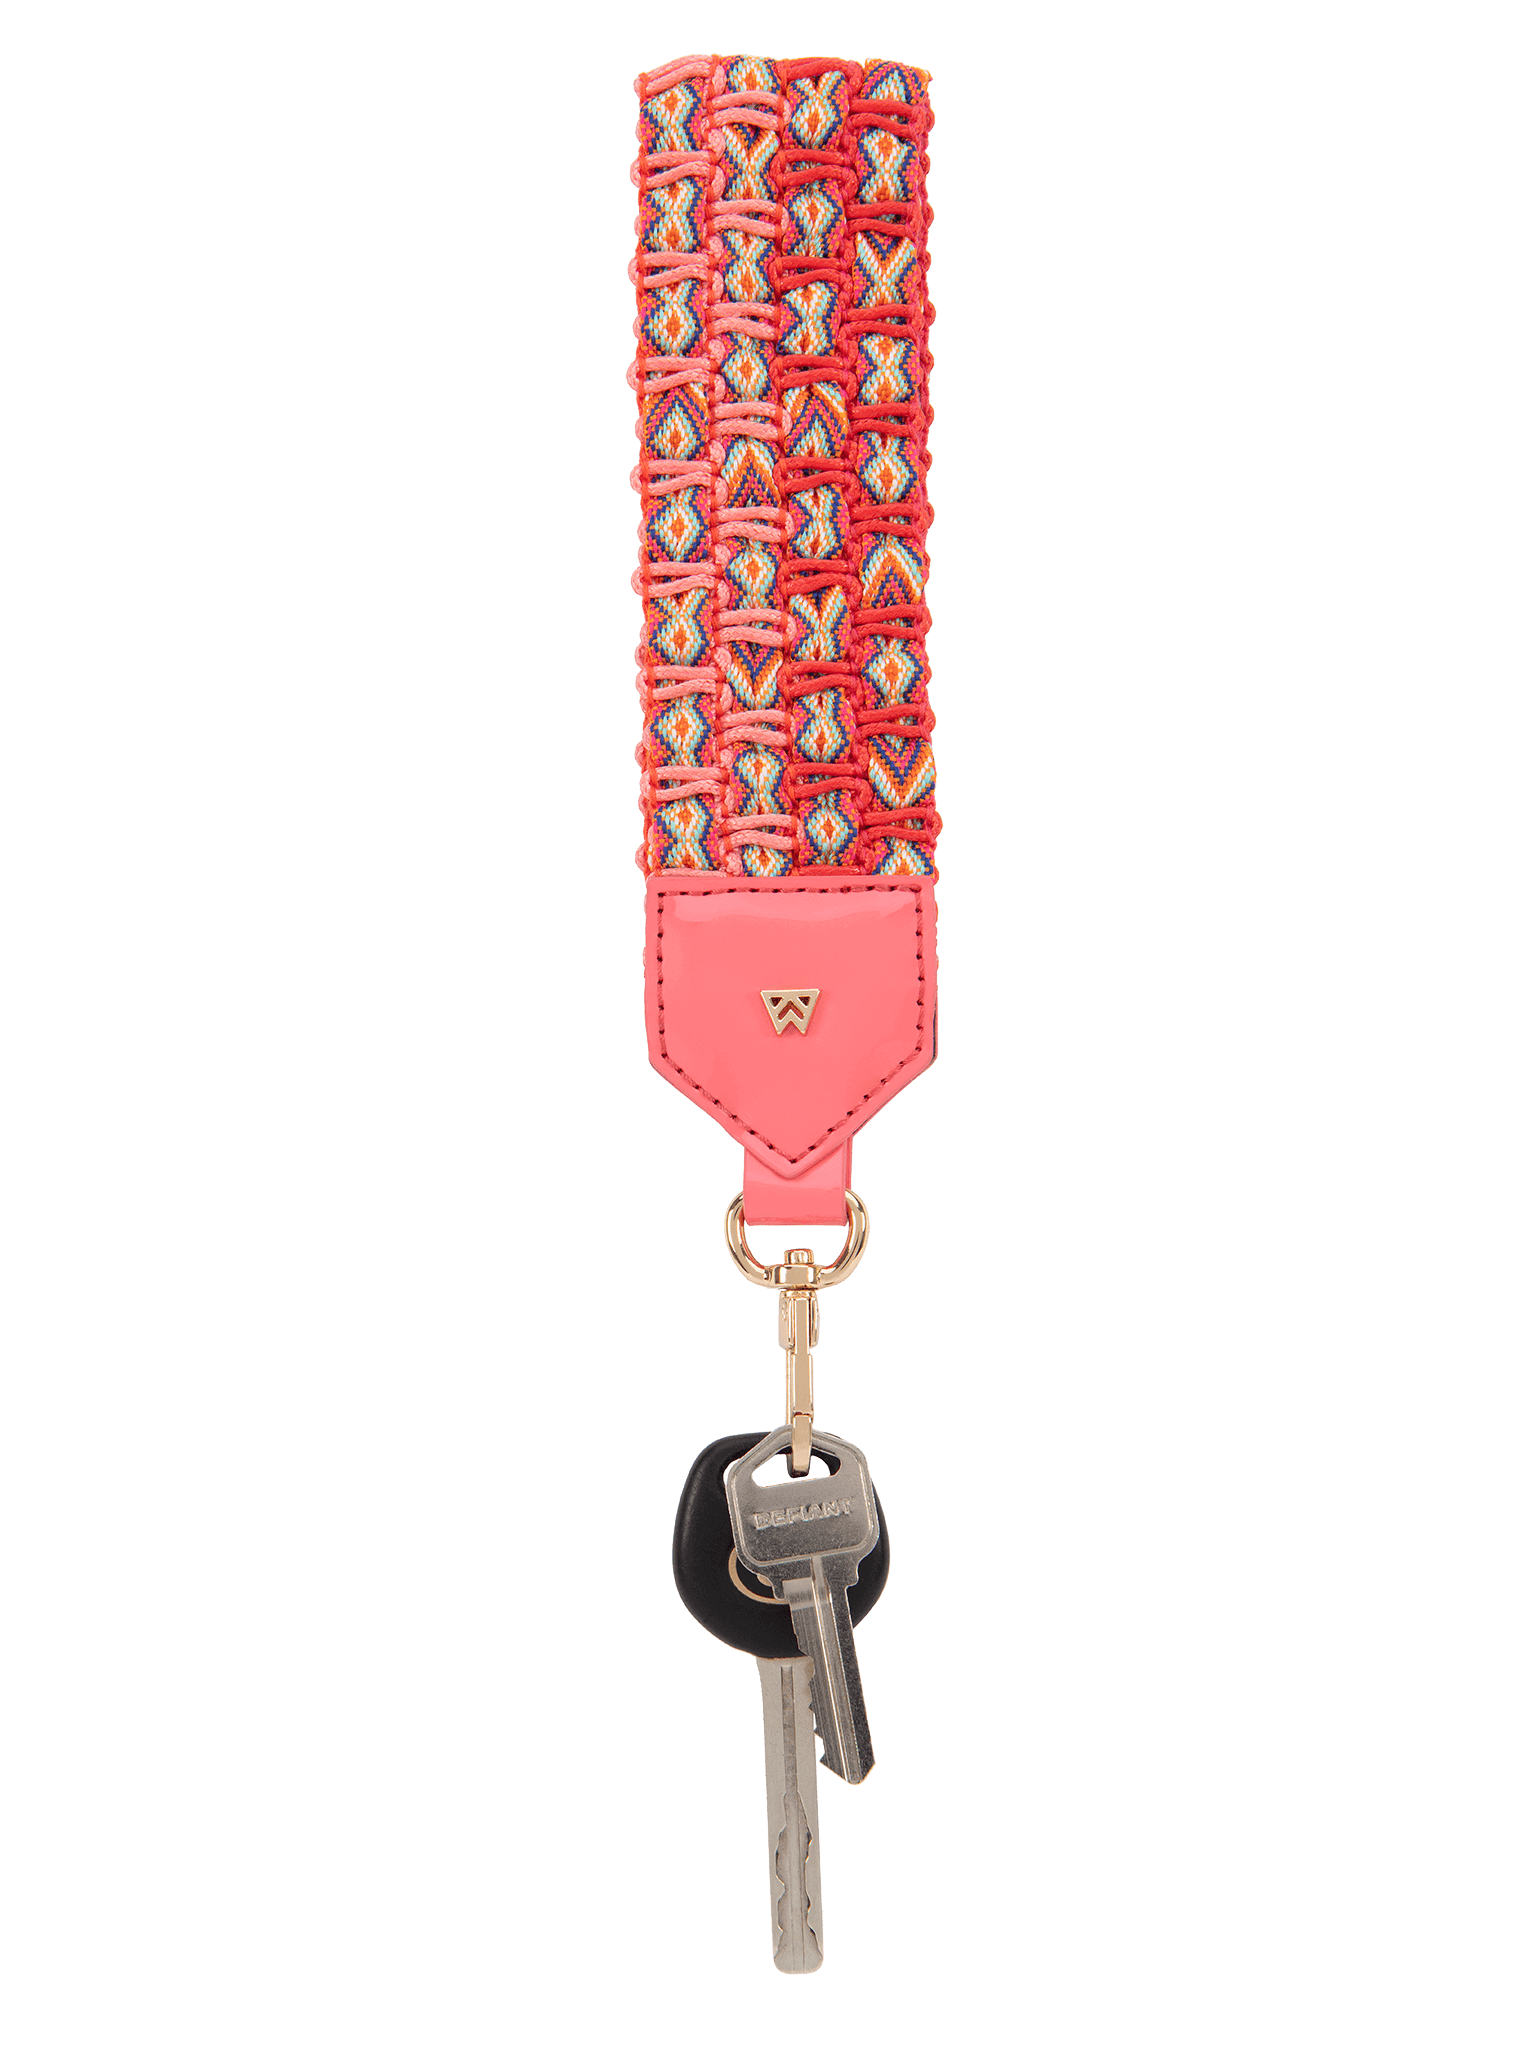 Front View of Keep on Cruisin Keychain in Coral with Keys 